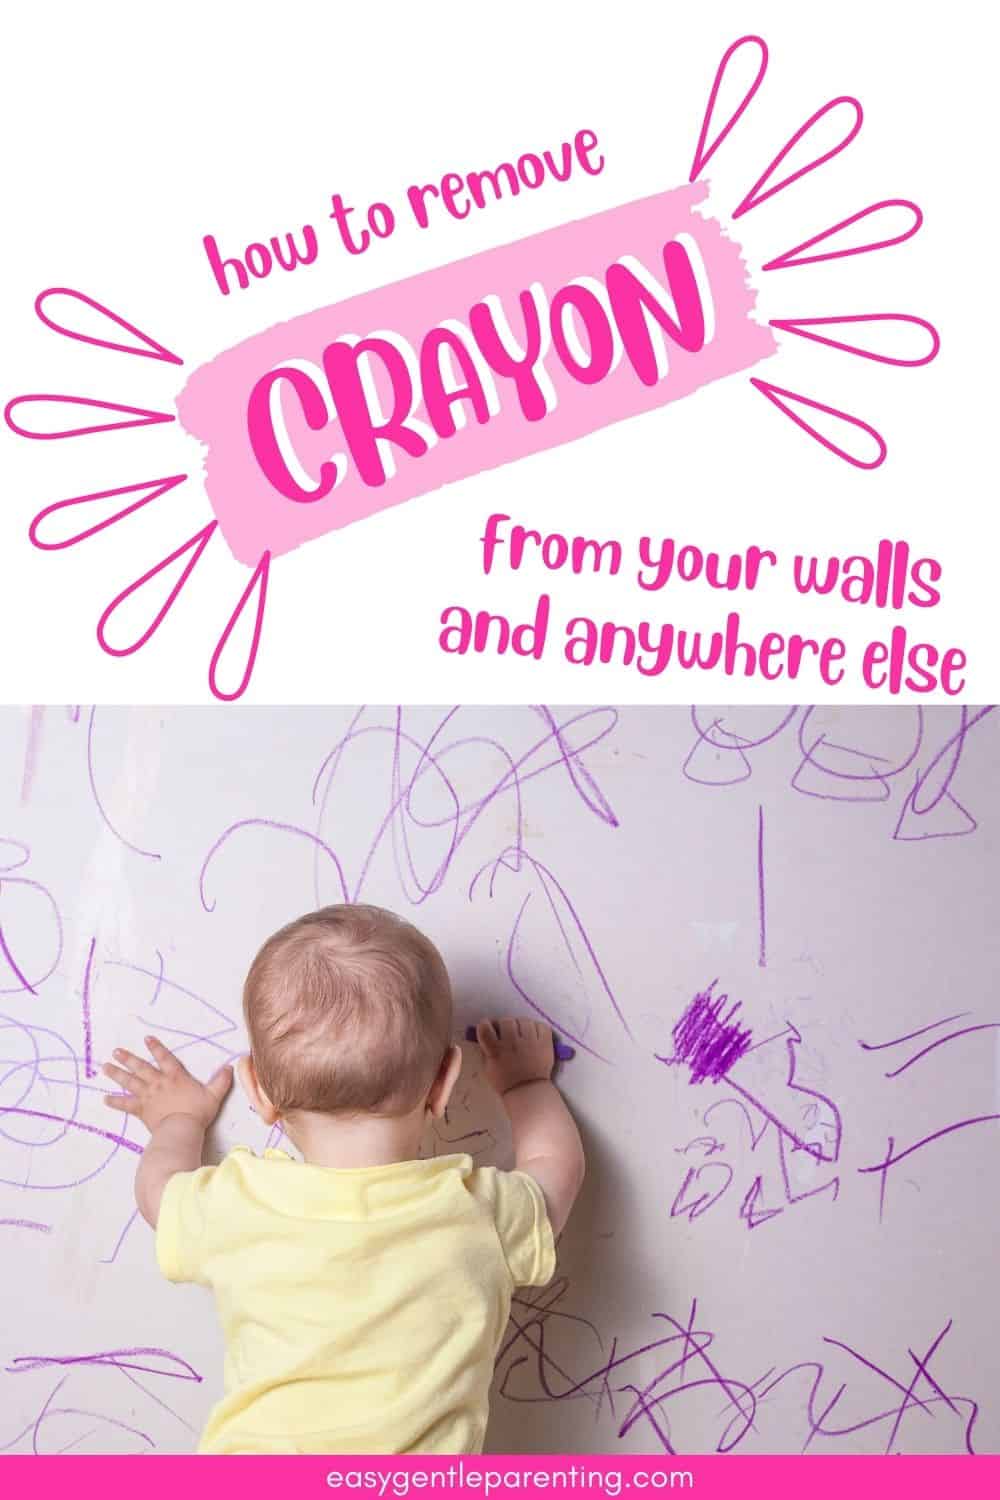 text reads "How to remove crayon from your walls and anywhere else"